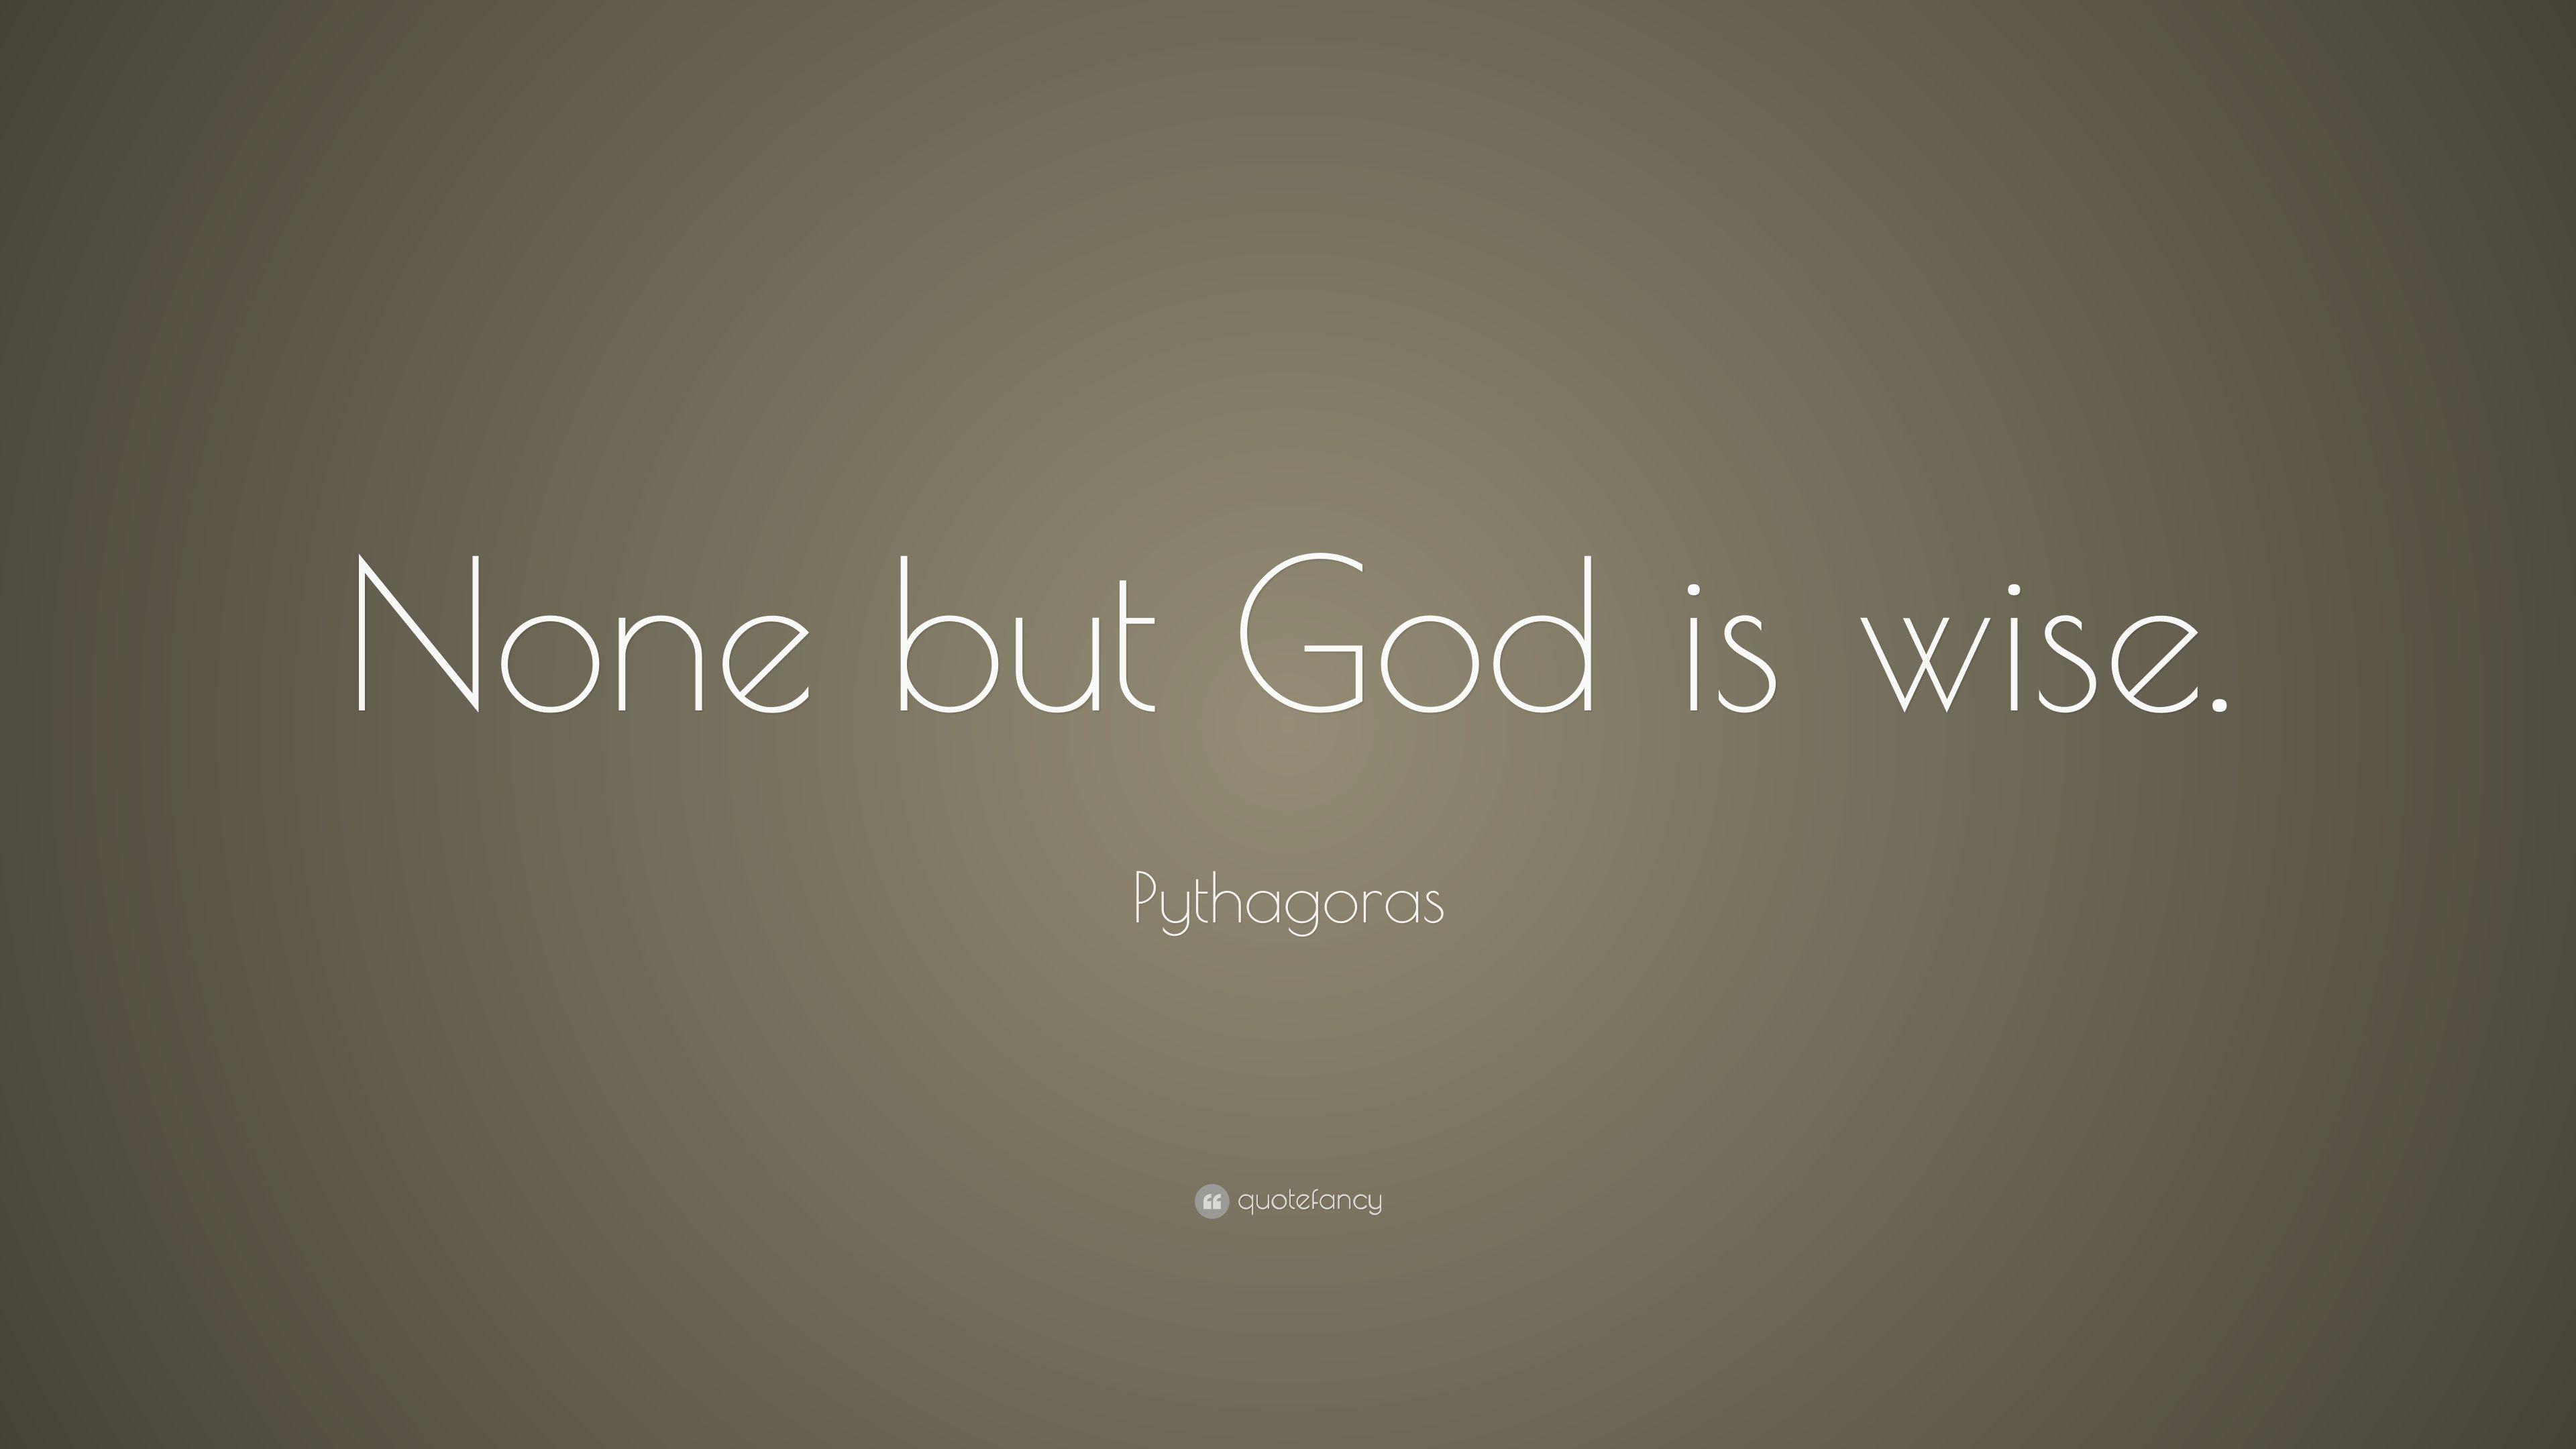 Pythagoras Quote: “None but God is wise.” (12 wallpaper)